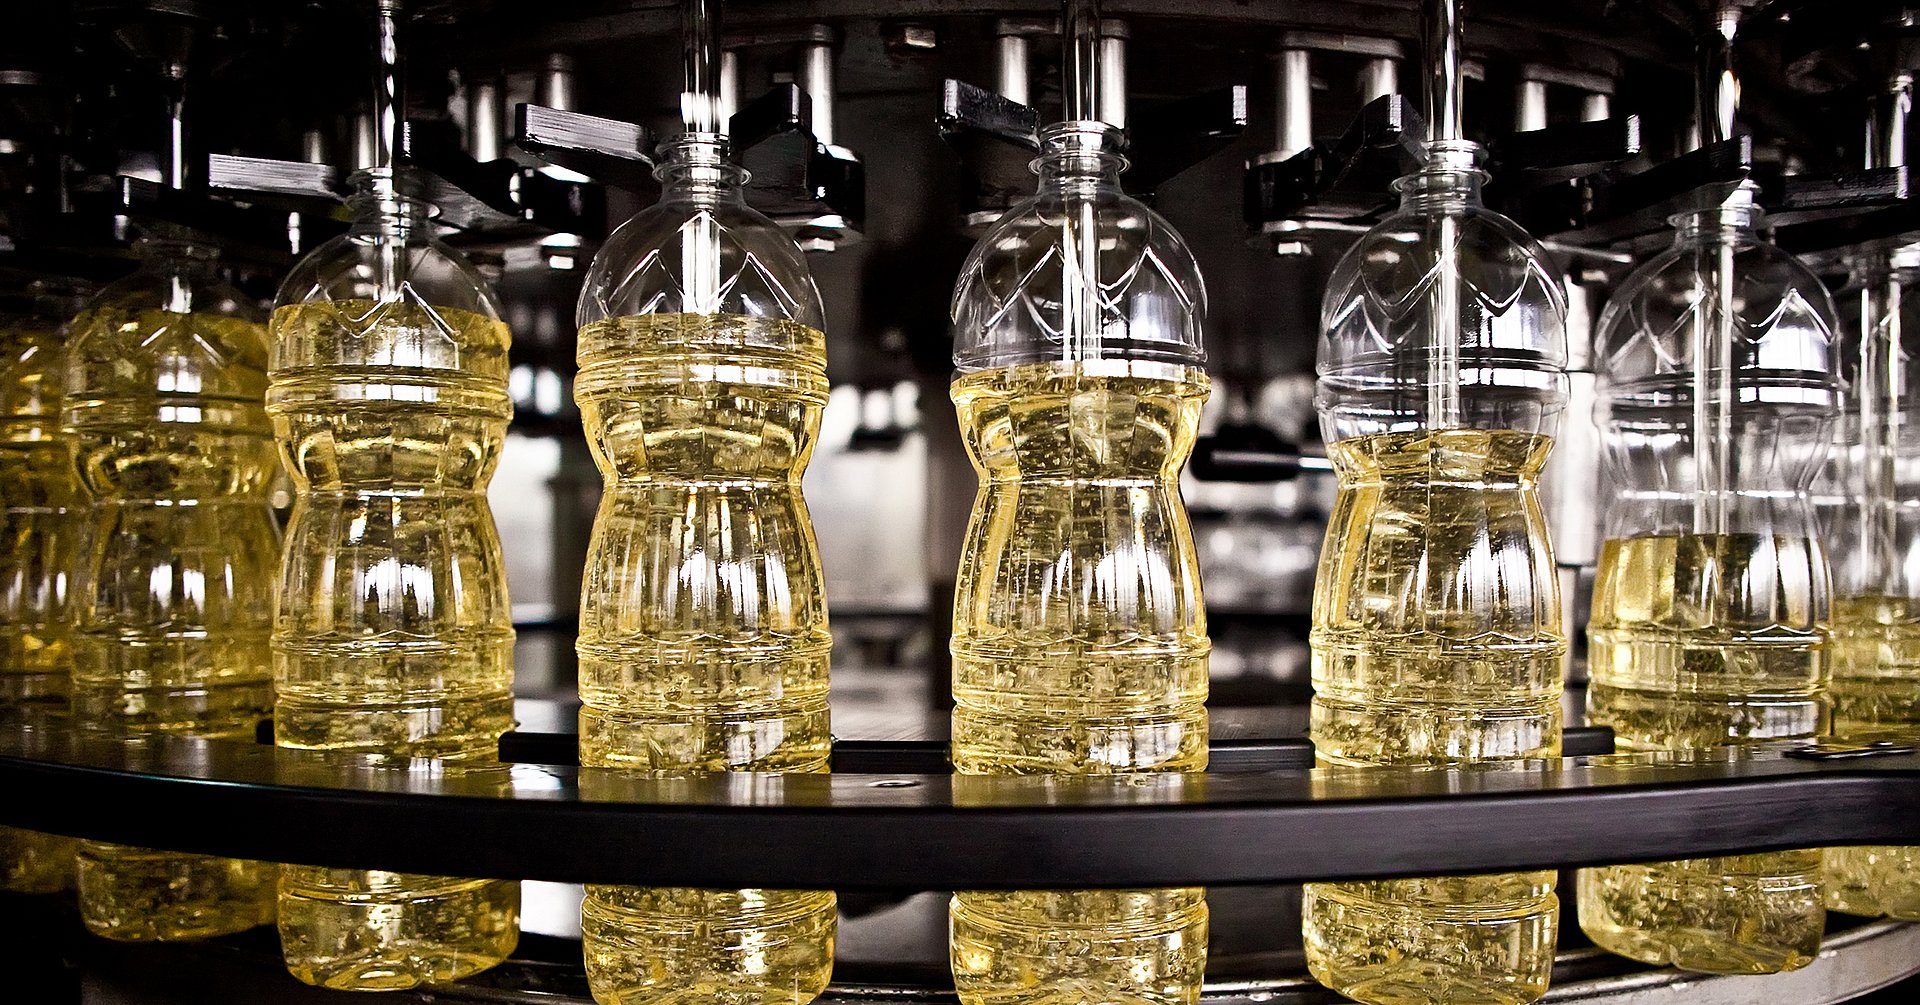 Sunflower oil in the bottle moving on production line. Shallow dof.